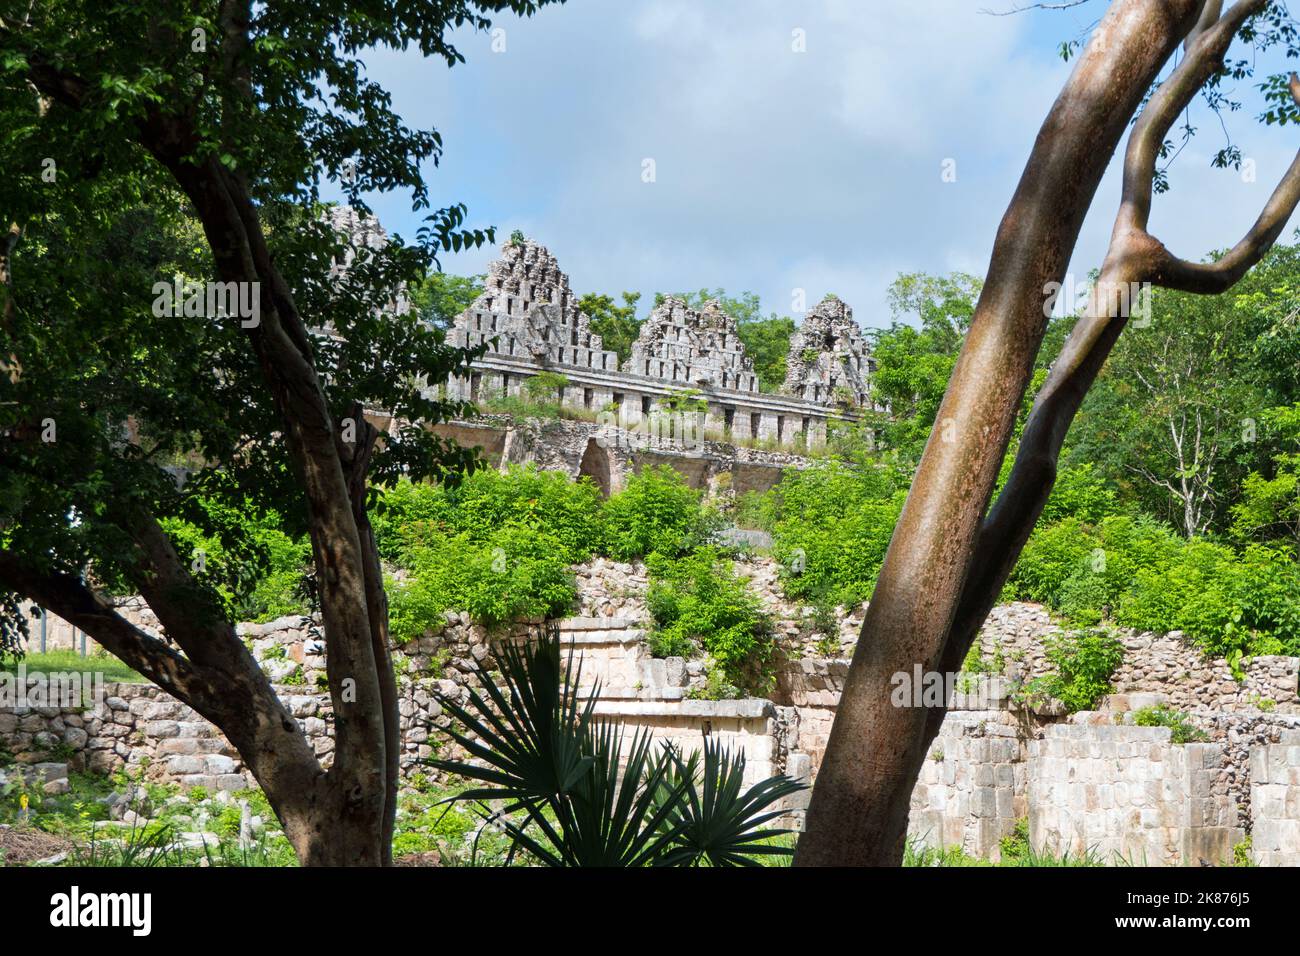 The Maya archeological site of Uxmal in Yucatan, Mexico. Mayan ruins with the House of the Doves encroached by the jungle Stock Photo